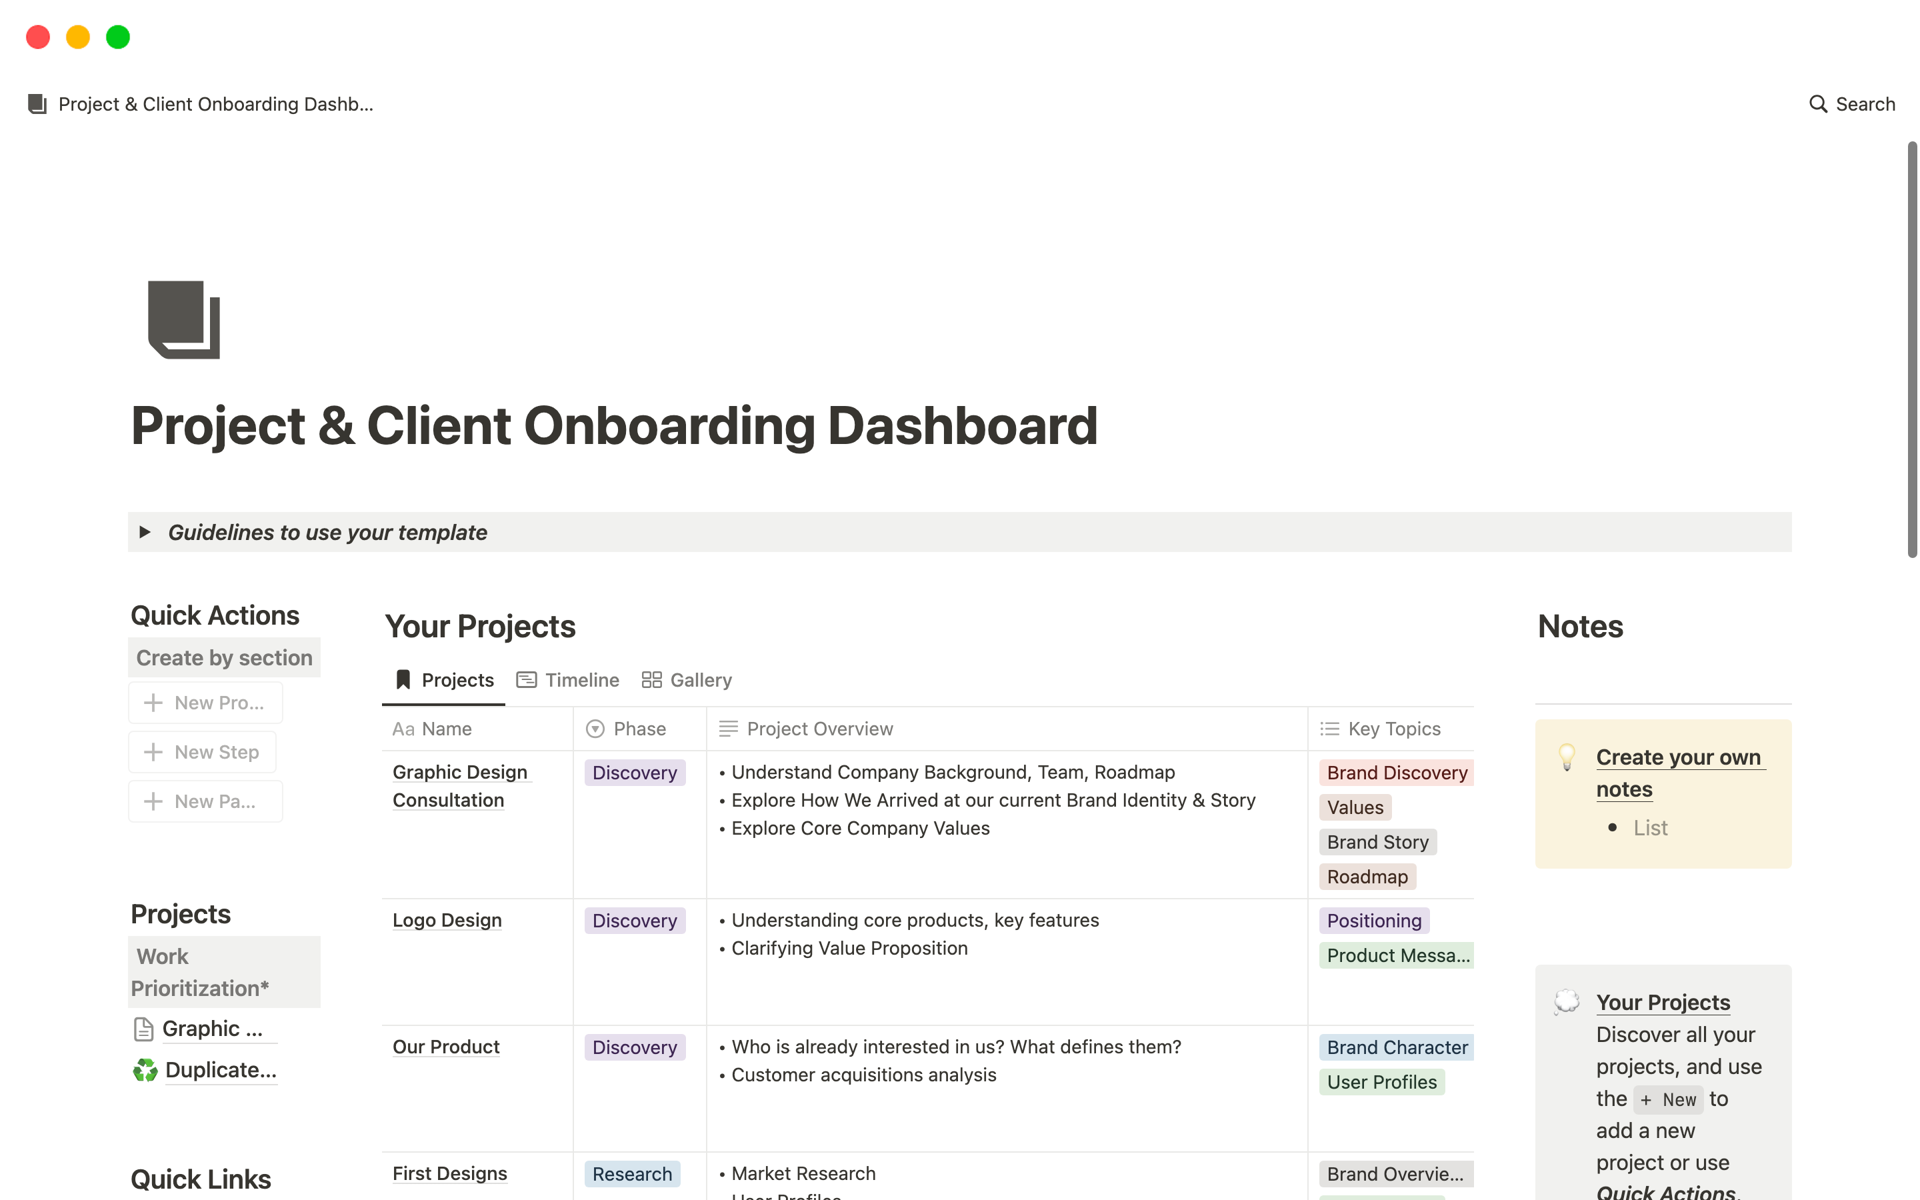 Project & Client Onboarding Dashboardのテンプレートのプレビュー